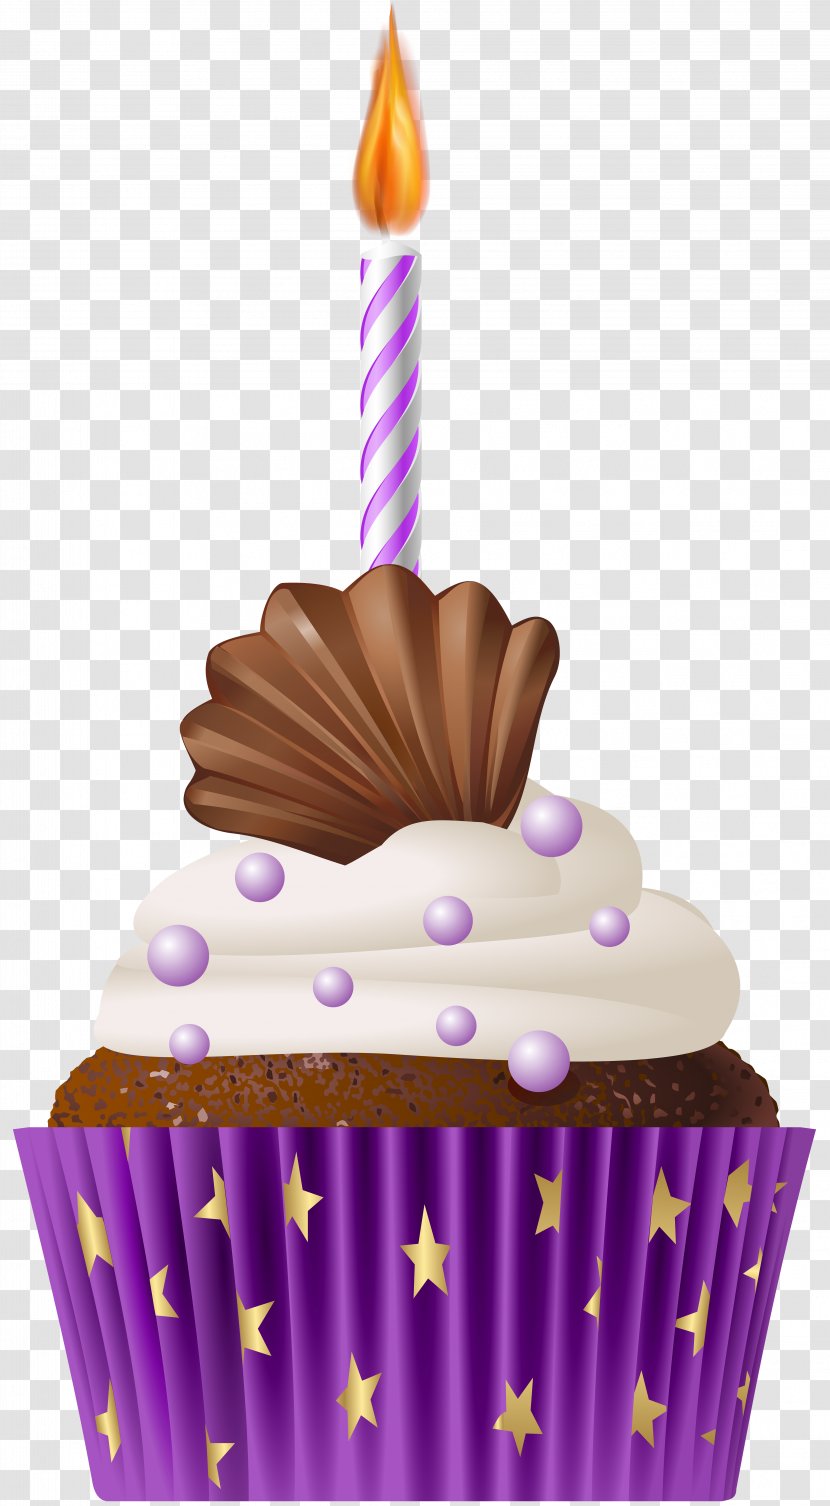 Cupcake Birthday Cake Muffin - Dessert - Purple With Candle Clip Art Transparent PNG